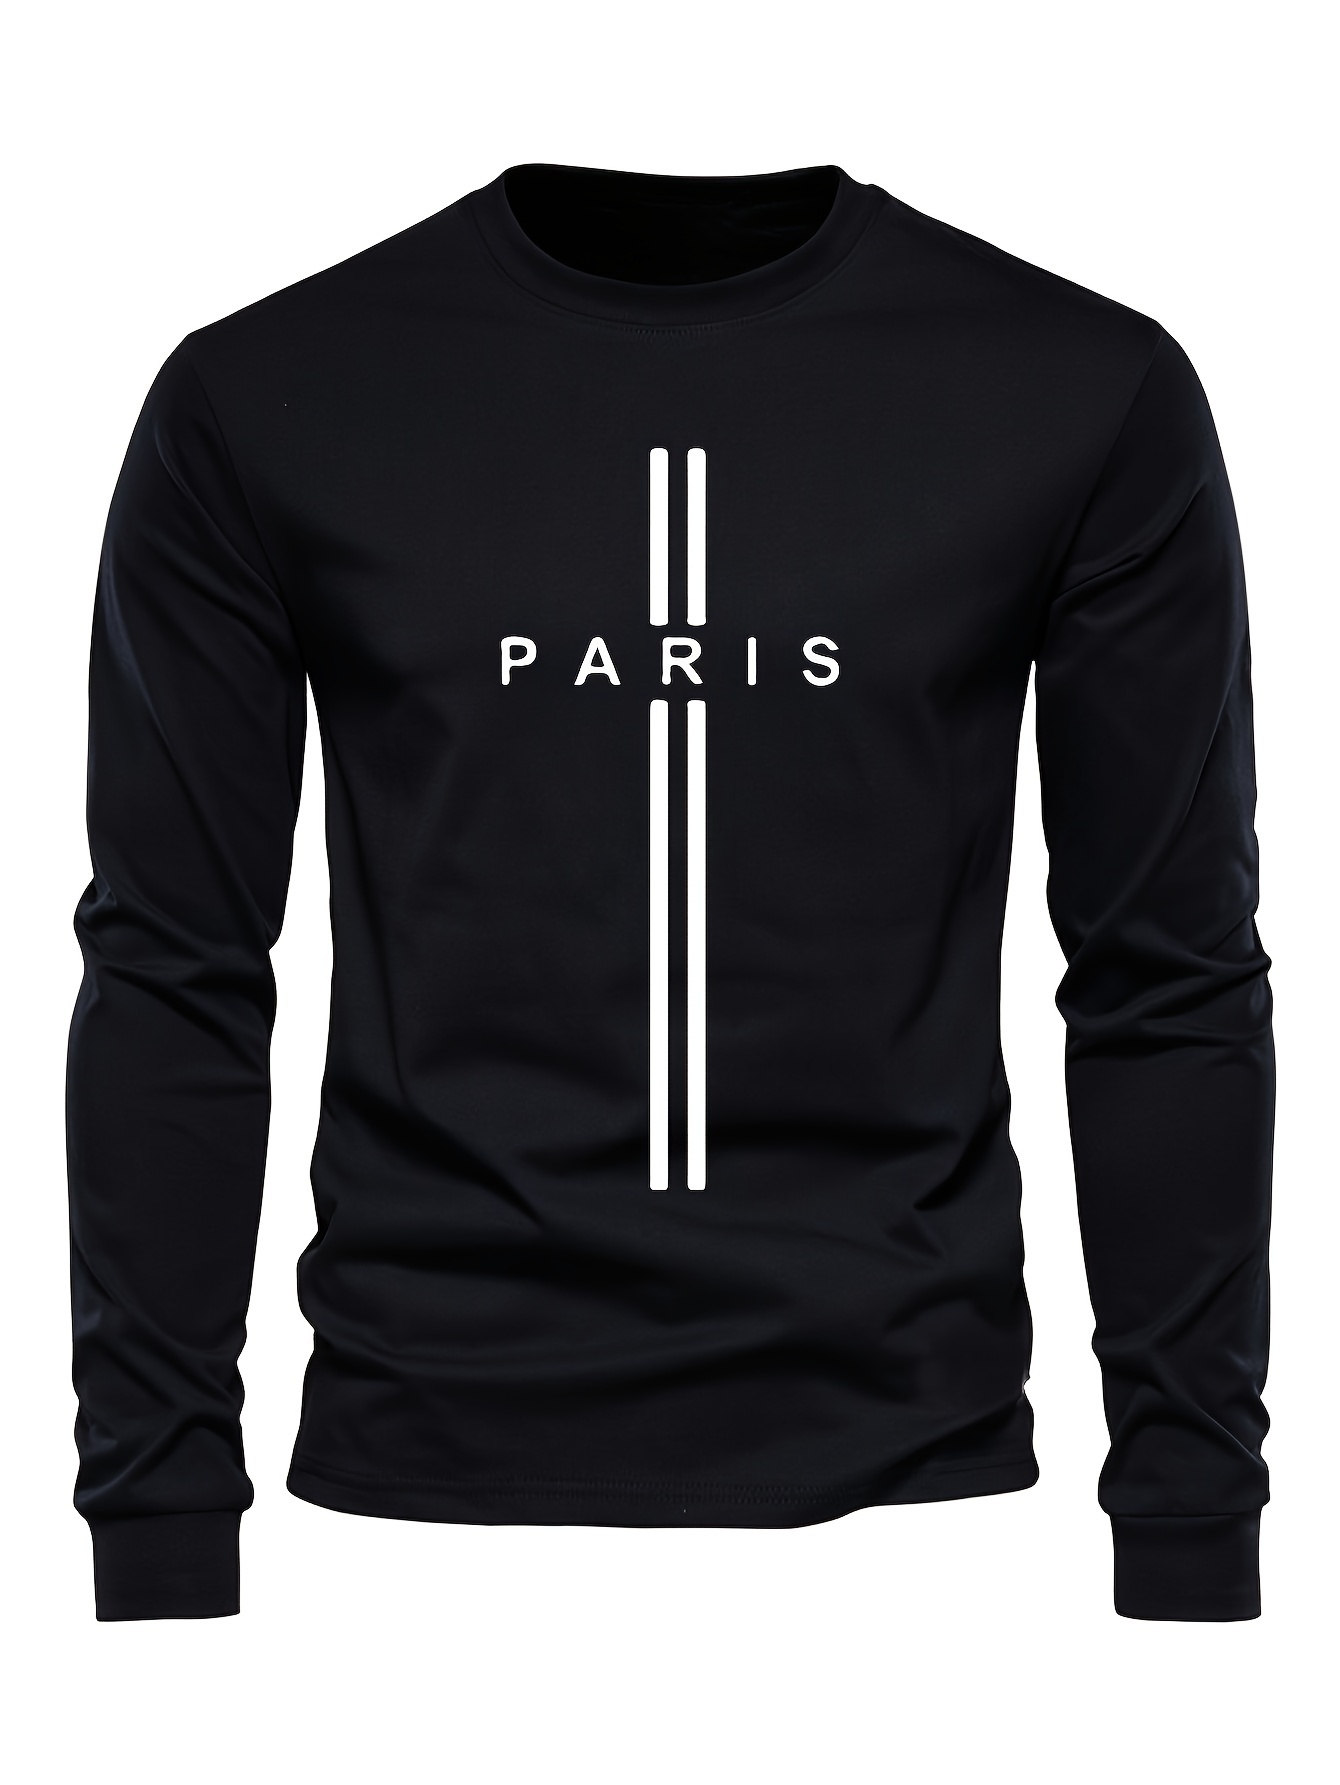 paris print mens graphic design crew neck long sleeve active t shirt tee casual comfy shirts for spring summer autumn mens clothing tops details 0